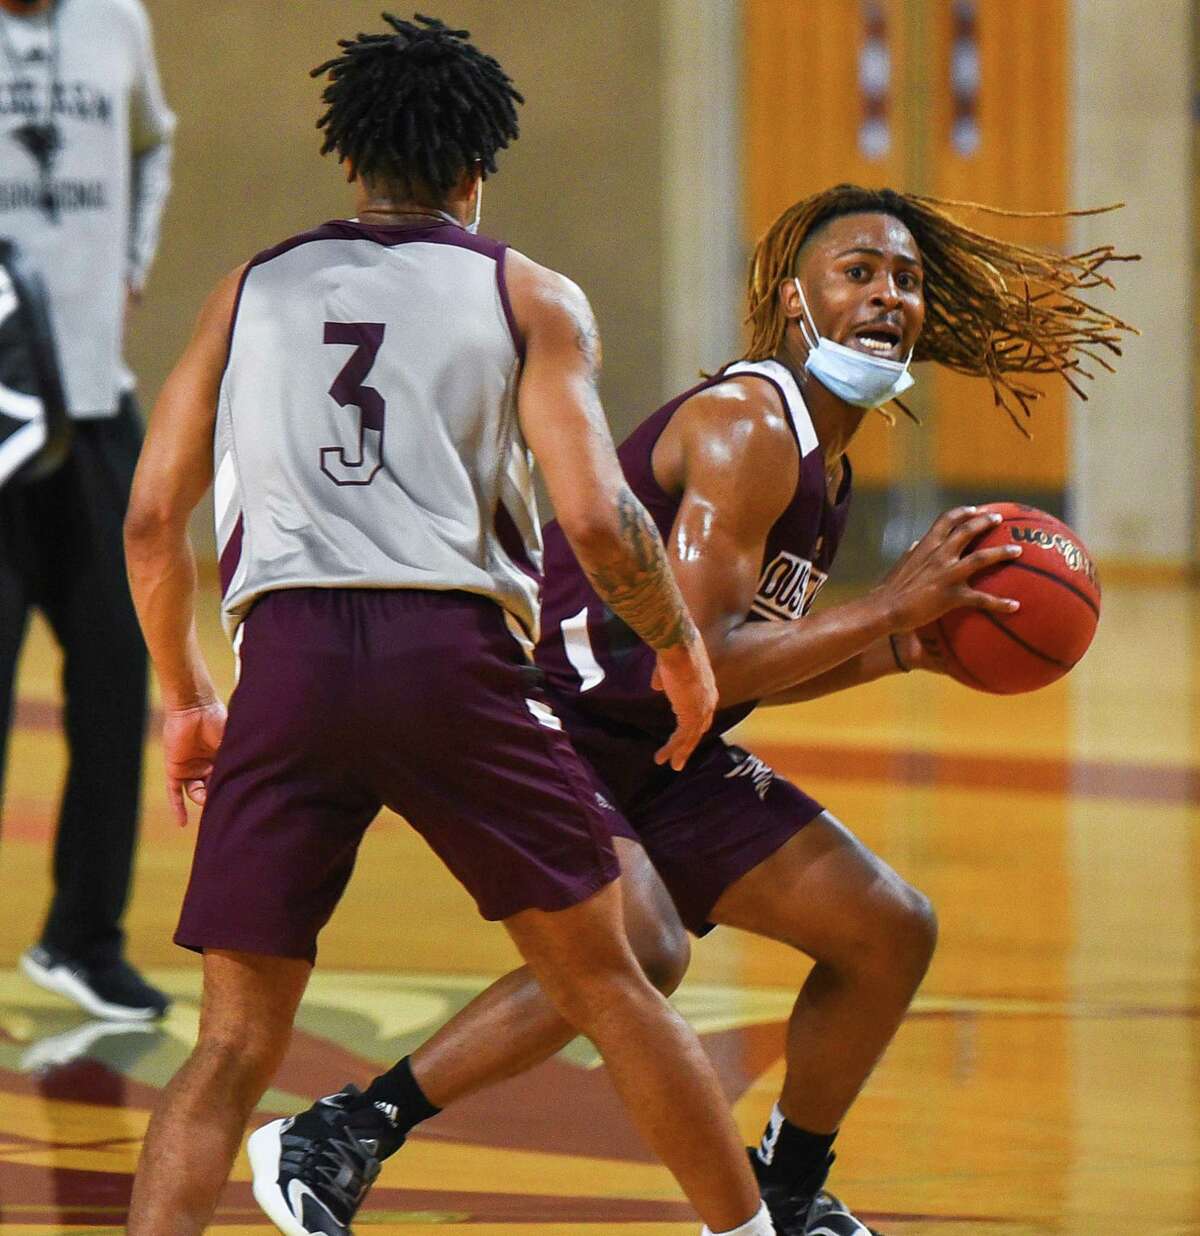 The TAMIU Men's Basketball Team practices Tuesday, Nov. 24, 2020, at the TAMIU Kinesiology Convocation Building.